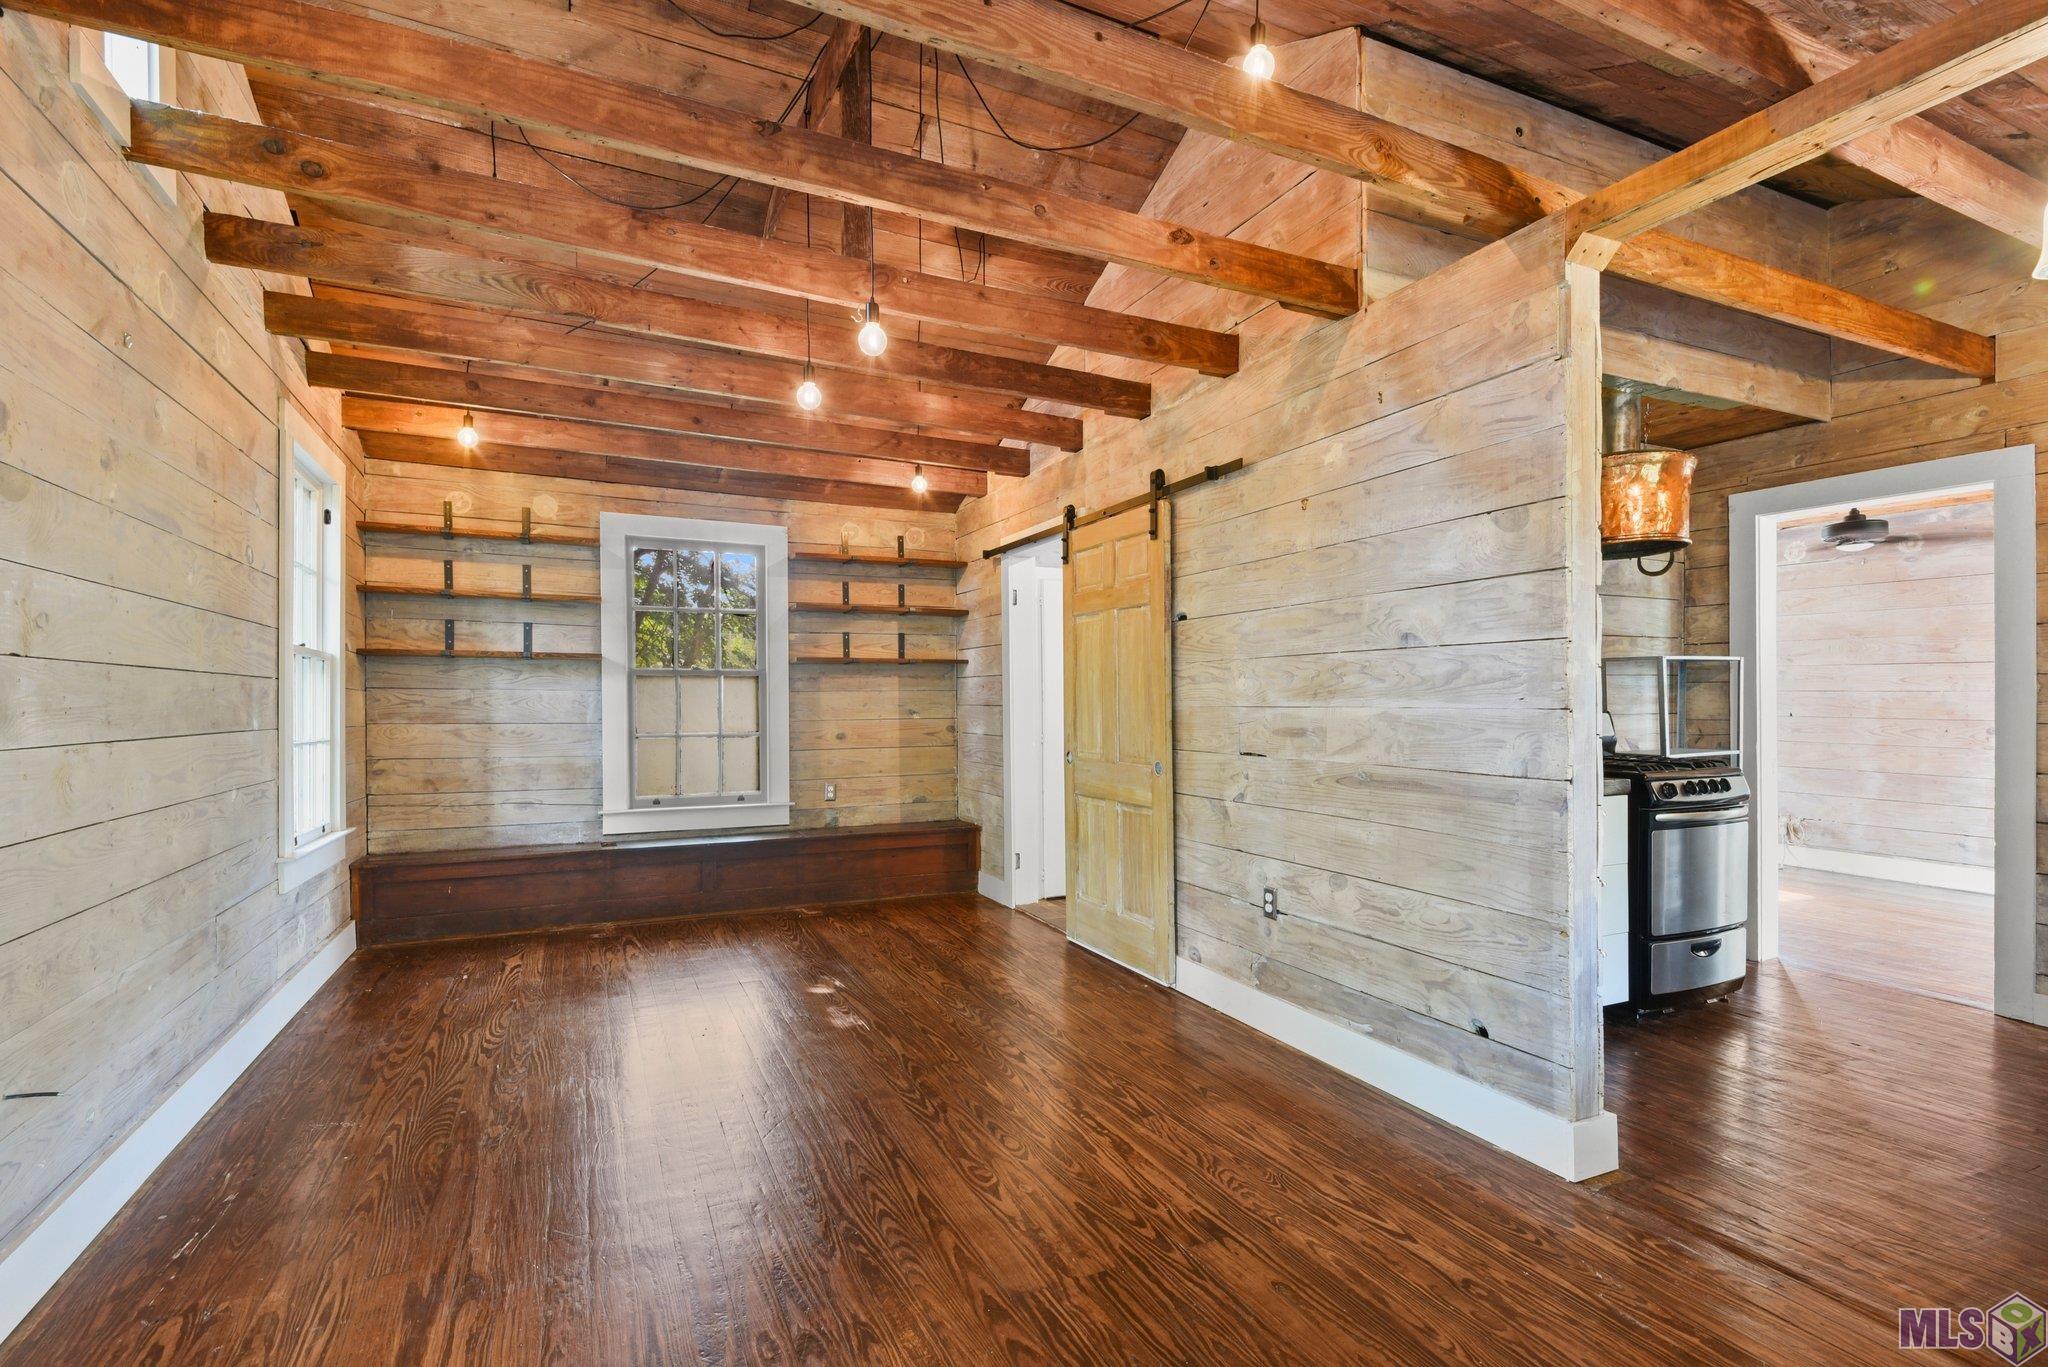 One of a kind private rustic cottage in Capitol Heights. A secluded retreat in the middle of everything midcity has to offer. Redesigned and renovated with all new electrical, updated plumbing, exposed wood walls, vaulted ceiling, wood floors, sinker cypress countertops, cast iron apron front sink, gas range, custom hood vent, sliding barn doors and unique lighting. Fully insulated: closed cell foam subfloor, open cell foam at roofline and cellulose in walls. Living area is on the second floor with washer and dryer at ground level below. Ground floor makes for a great outdoor space that has the potential to be enclosed for additional living space. Property under termite contract. PROPERTY IS NOT ACCESSIBLE FROM HEBERT STREET, must be accessed by way of the alley from Capitol Heights.  Owner/Agent